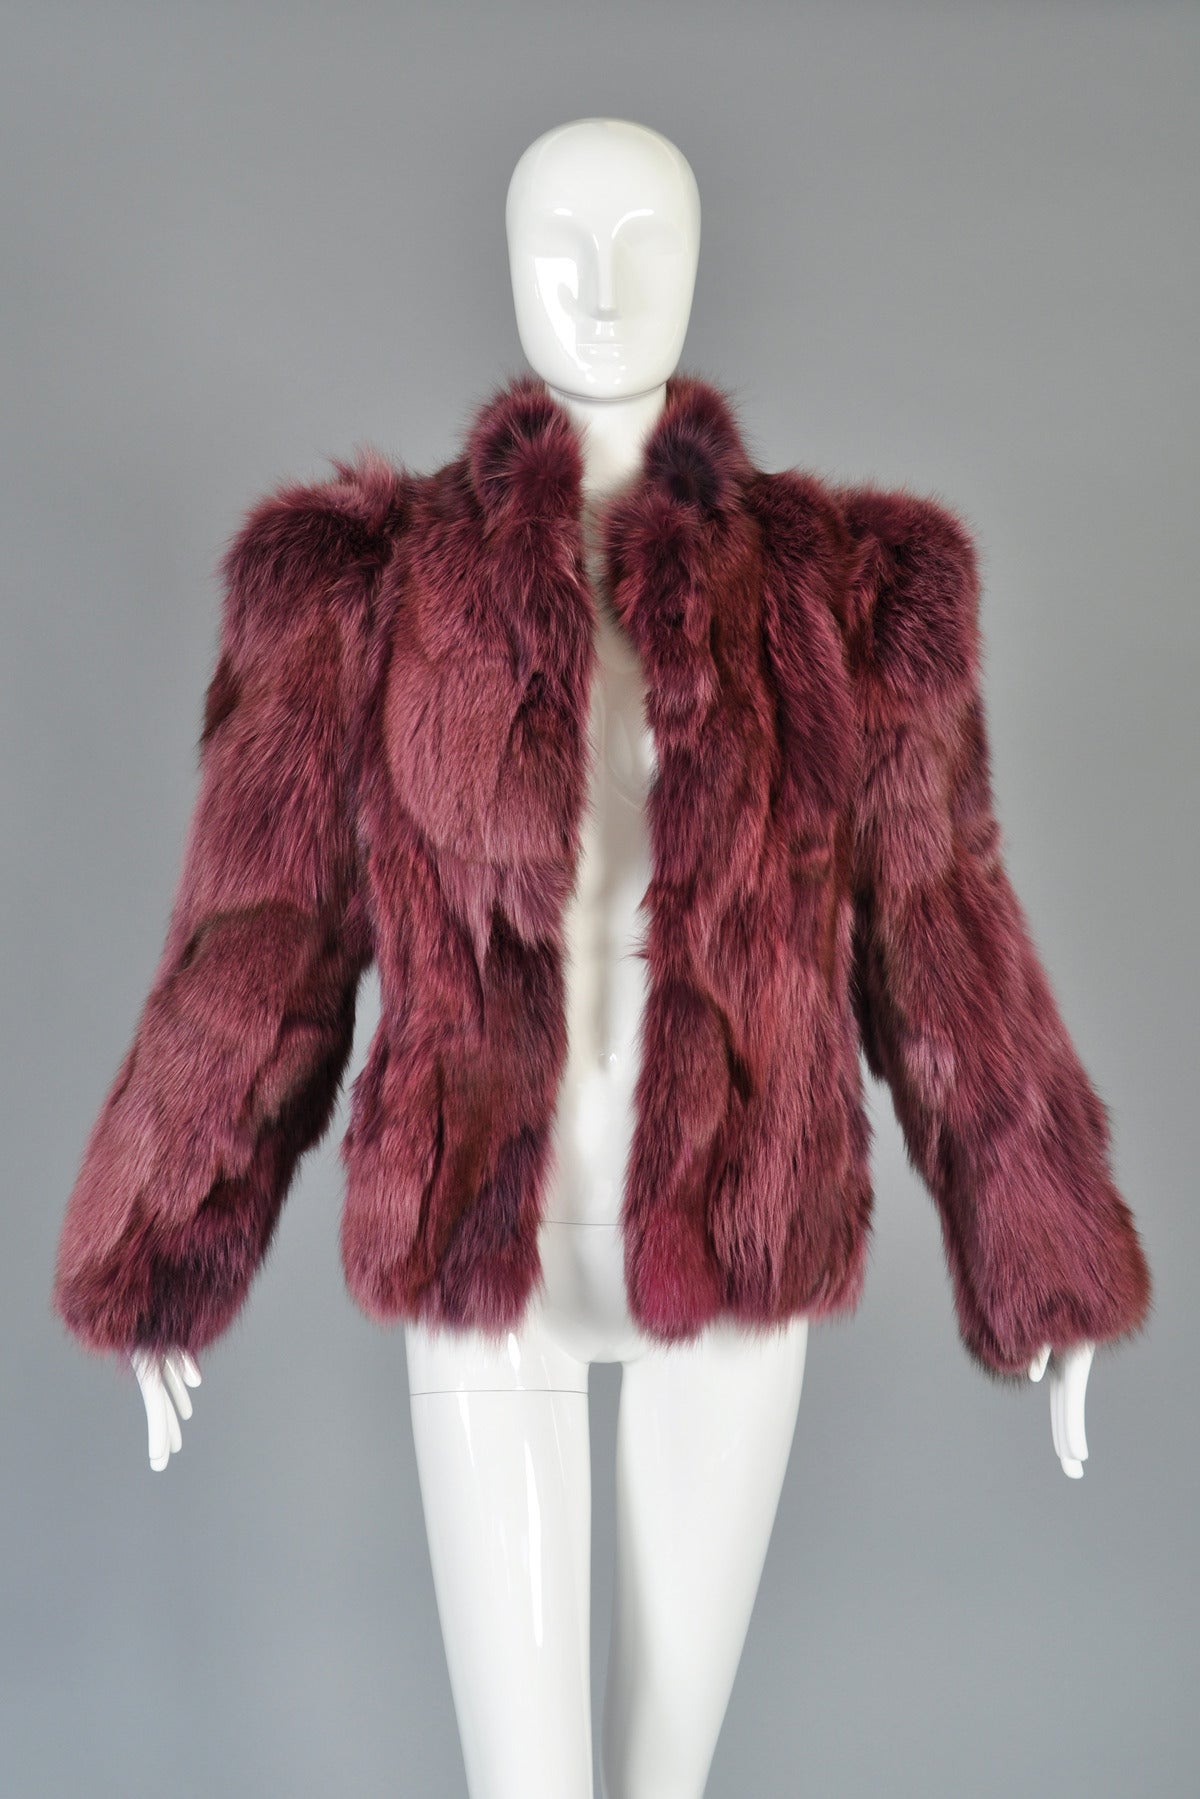 Superb vintage 1980s raspberry colored fox fur coat. INCREDIBLE piece in an incredible color! Raspberry patchwork body with high neckline, massive shoulders and super long sleeves. Has very padded, oversize shoulders that give this 1980s piece a